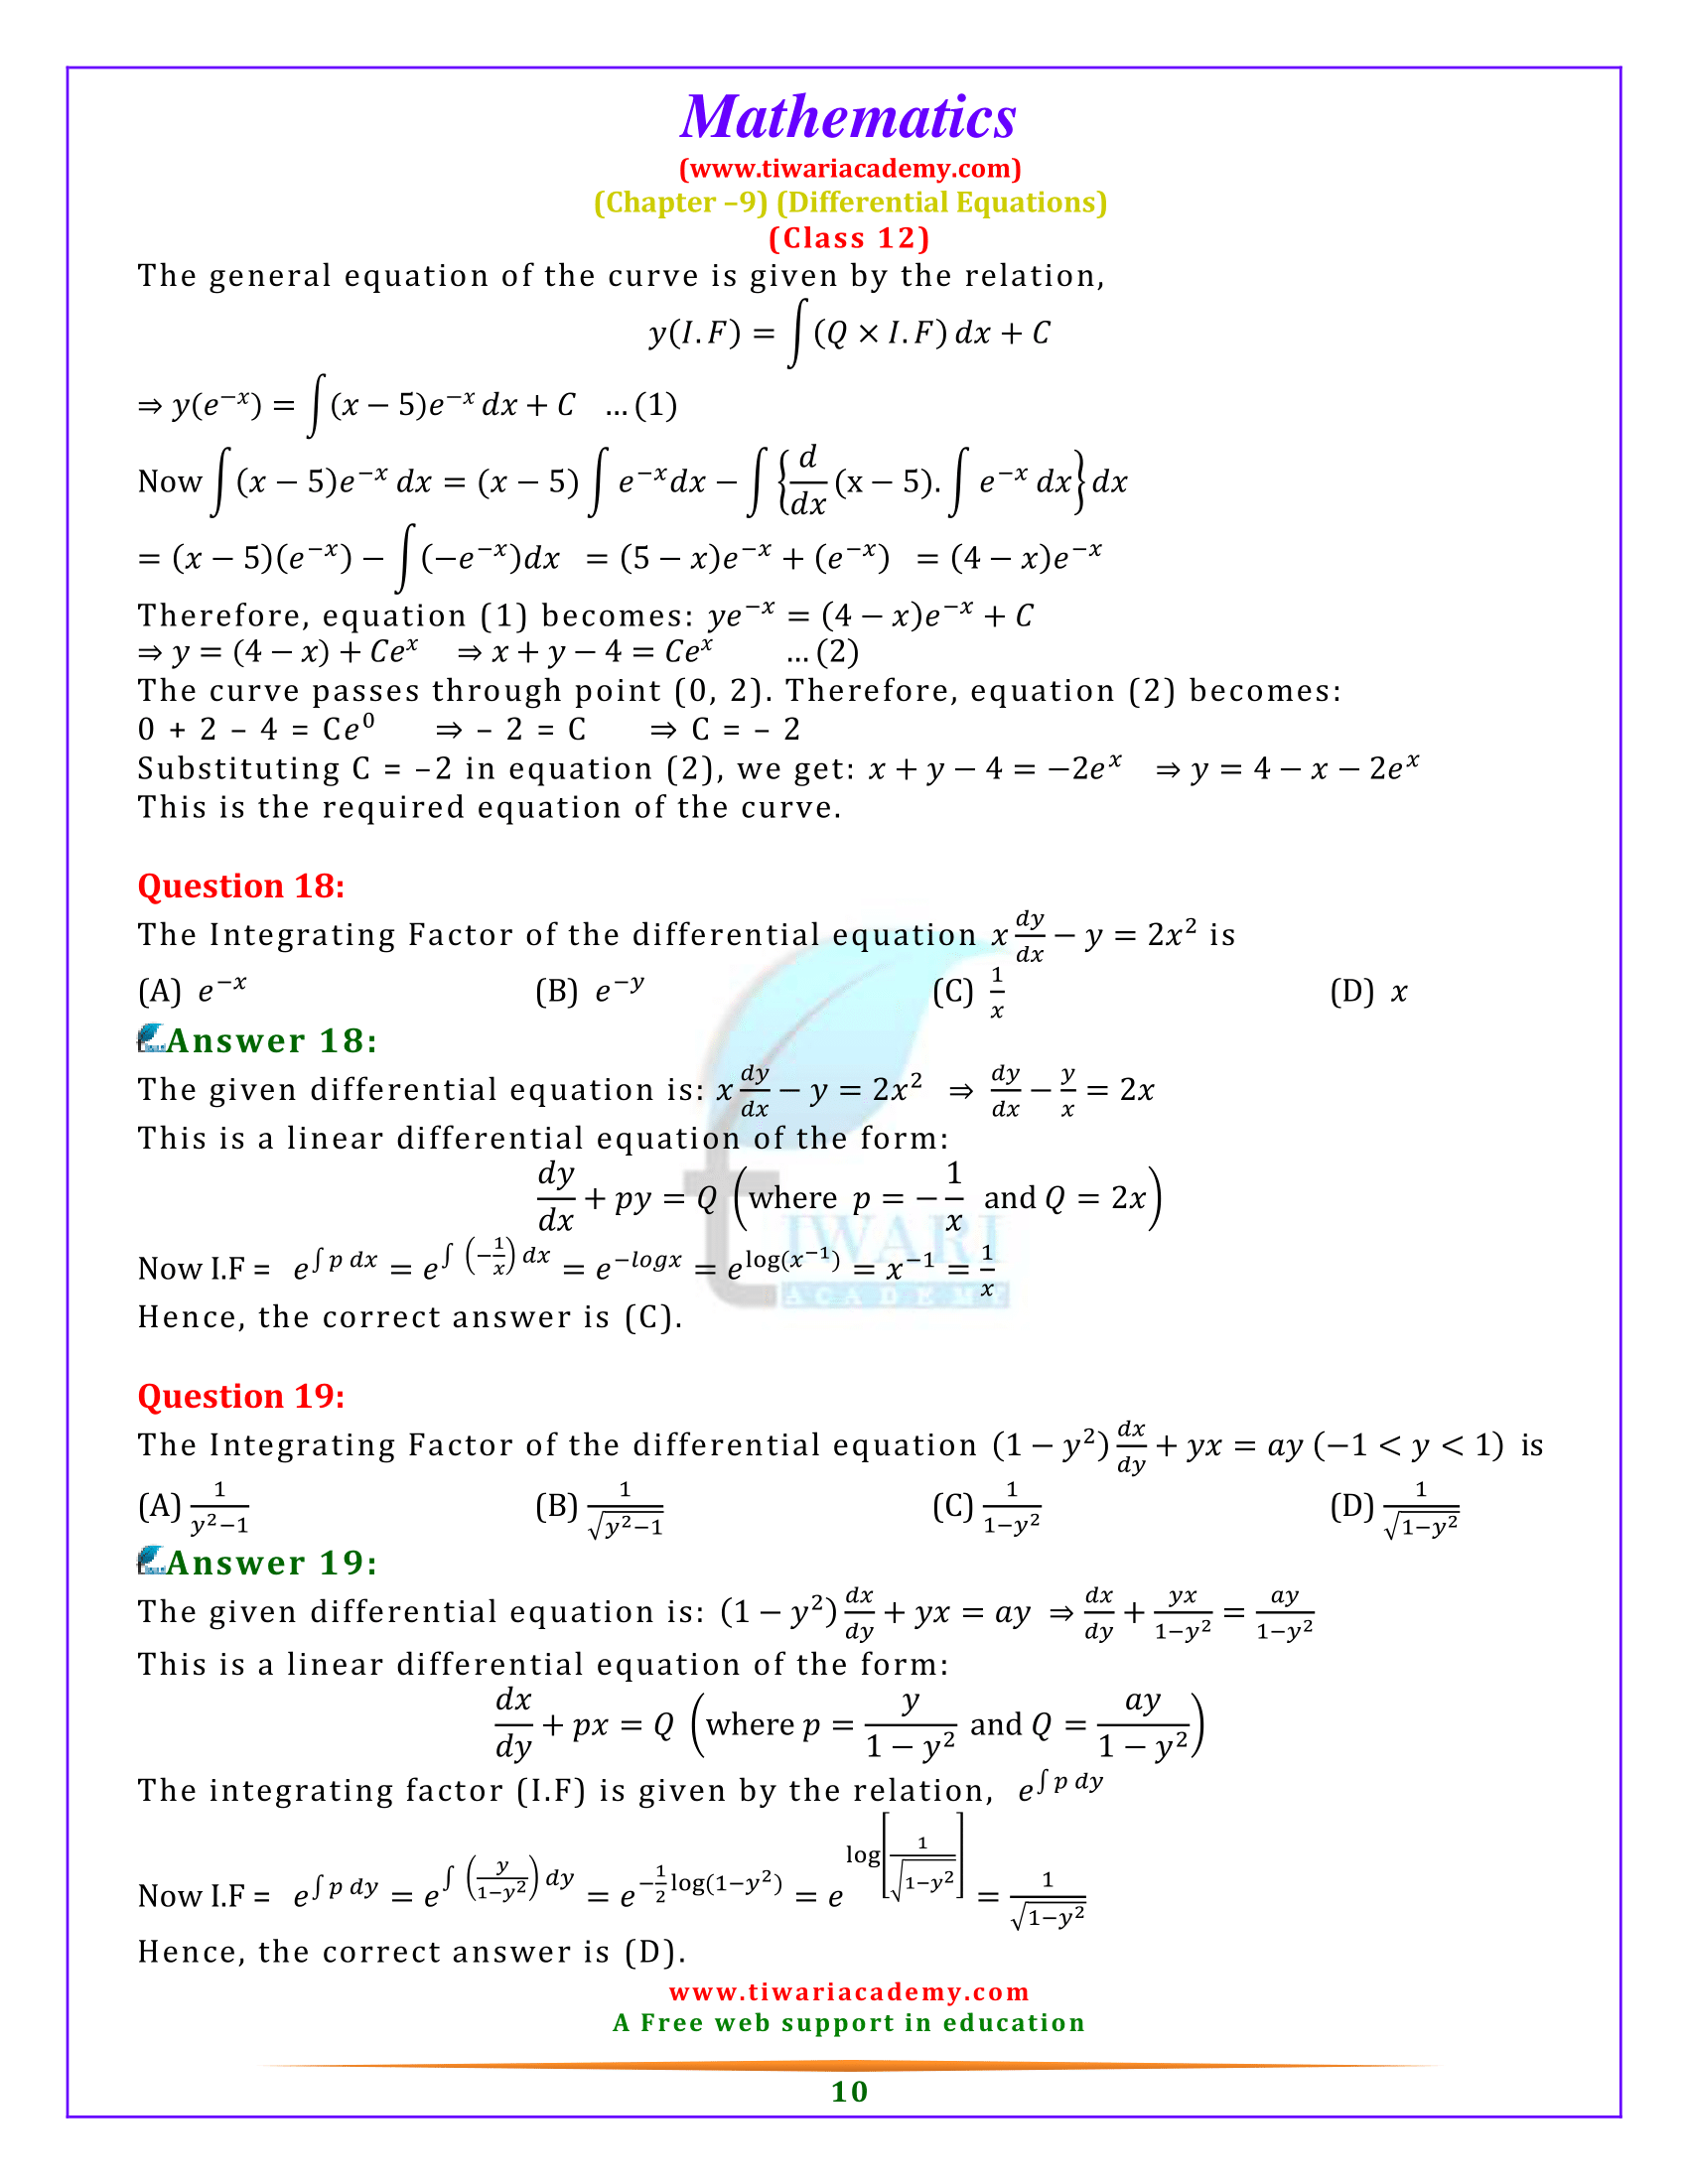 ex. 9.6 solution of 12th math